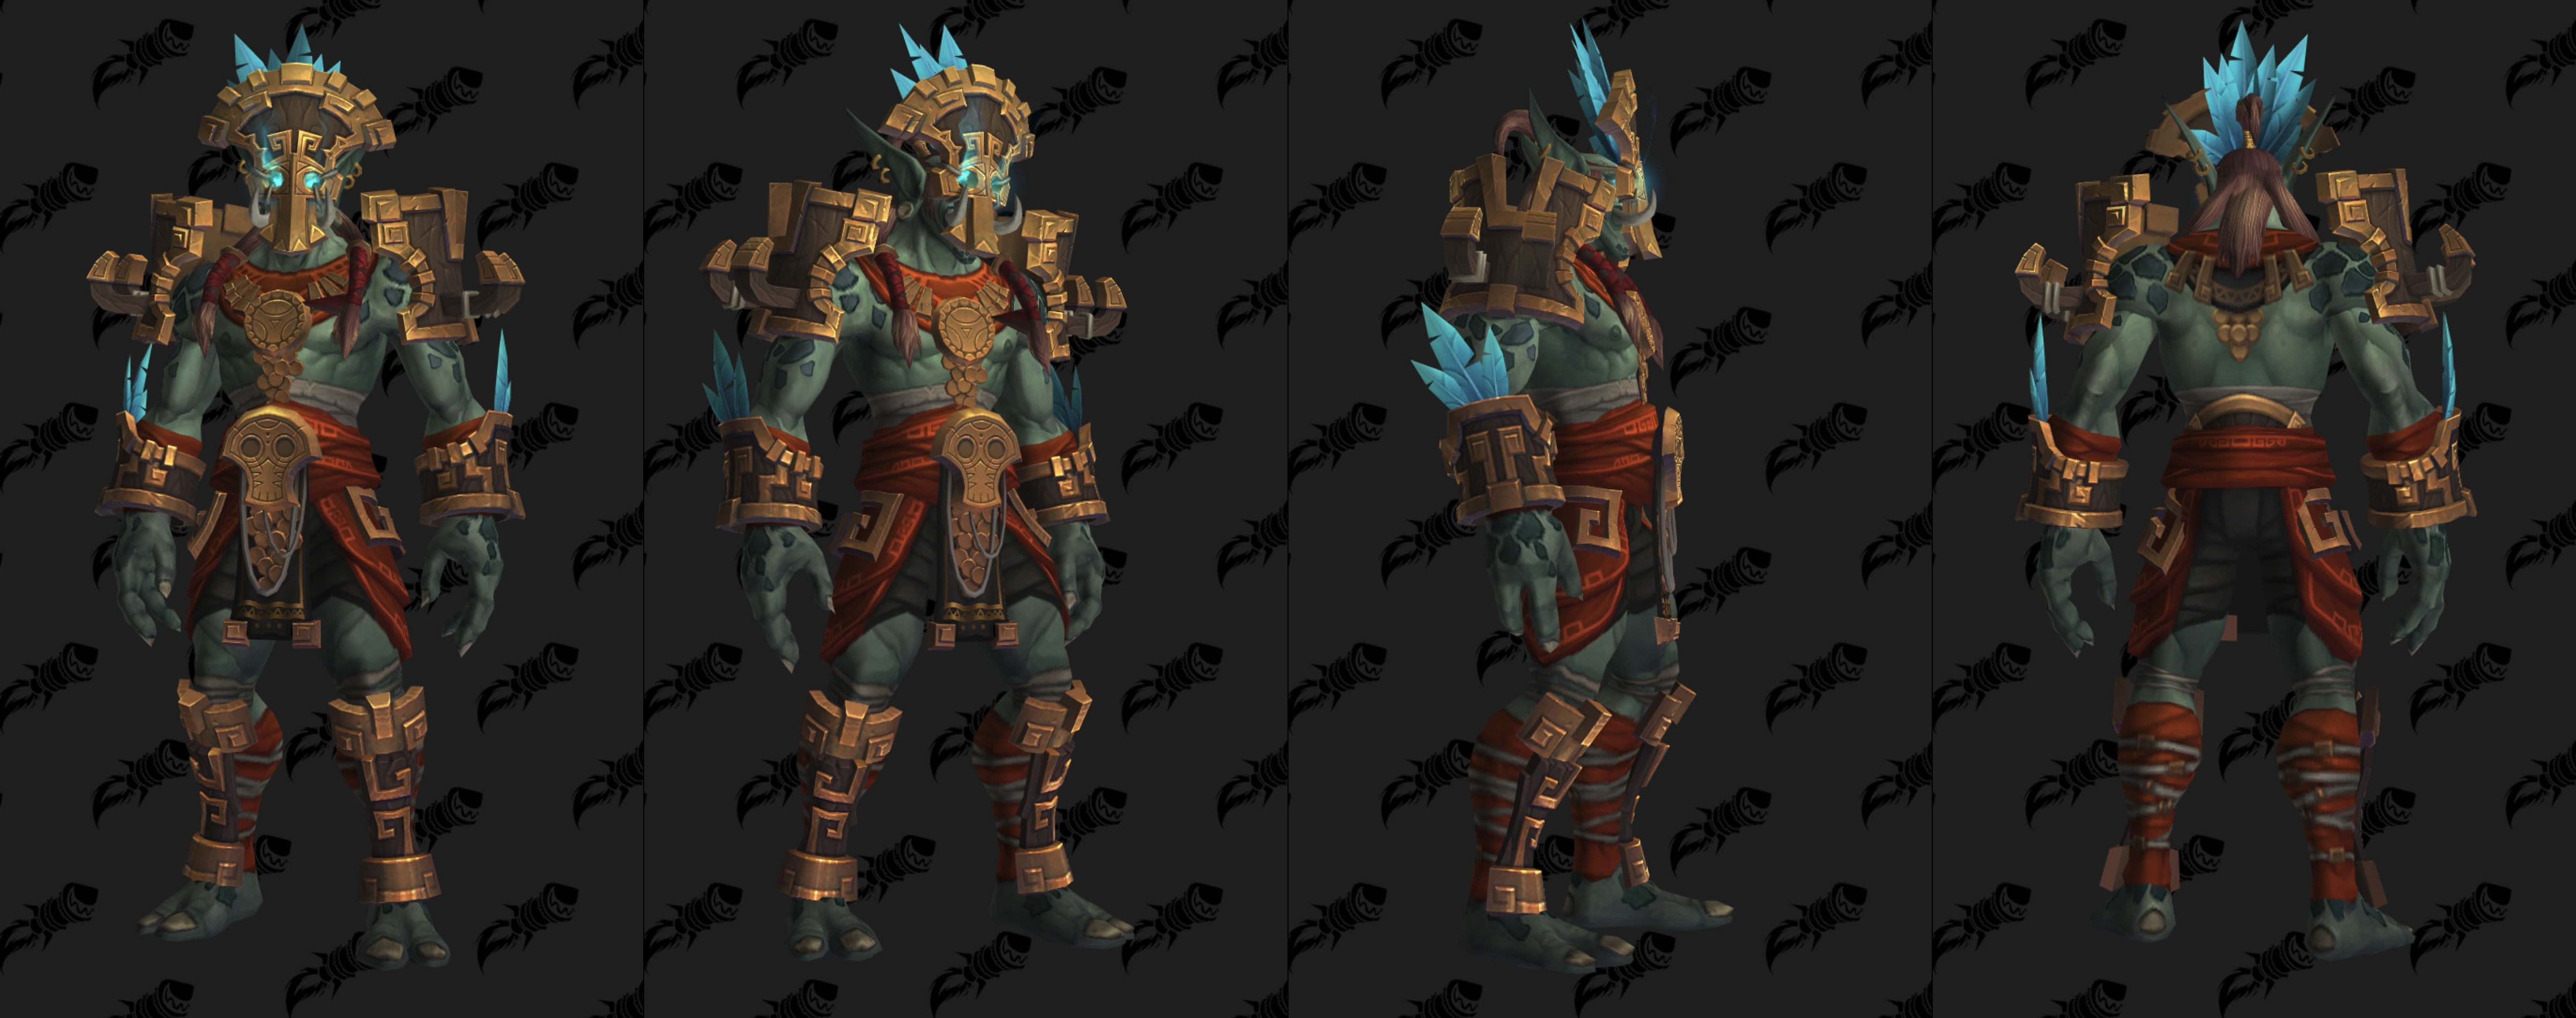 Blizzard Confirms Heritage Armor Available in MoP Remix: Timerunning